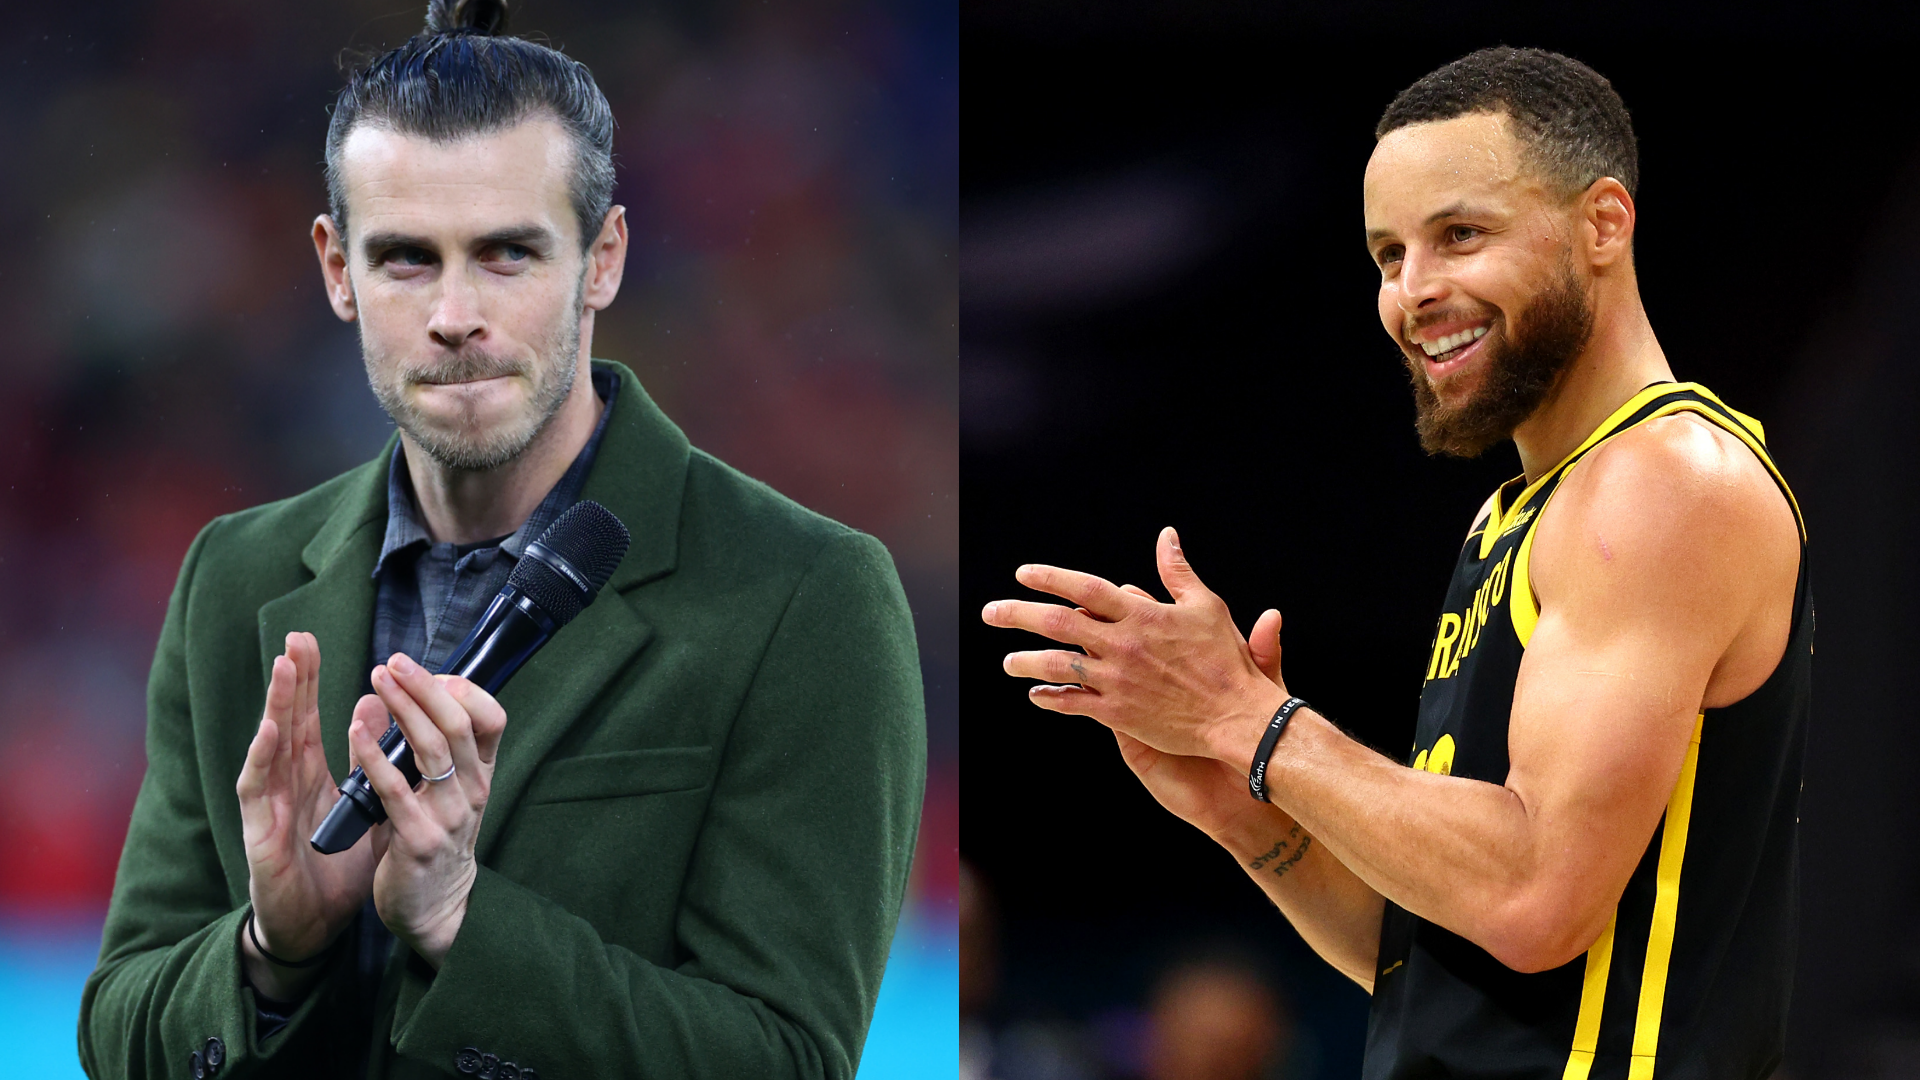 VIDEO: Steph Curry gifts Gareth Bale a signed Golden State Warriors shirt after meeting Real Madrid legend courtside - but Giorgio Chiellini is mocked by fans after 'snub' from NBA superstar